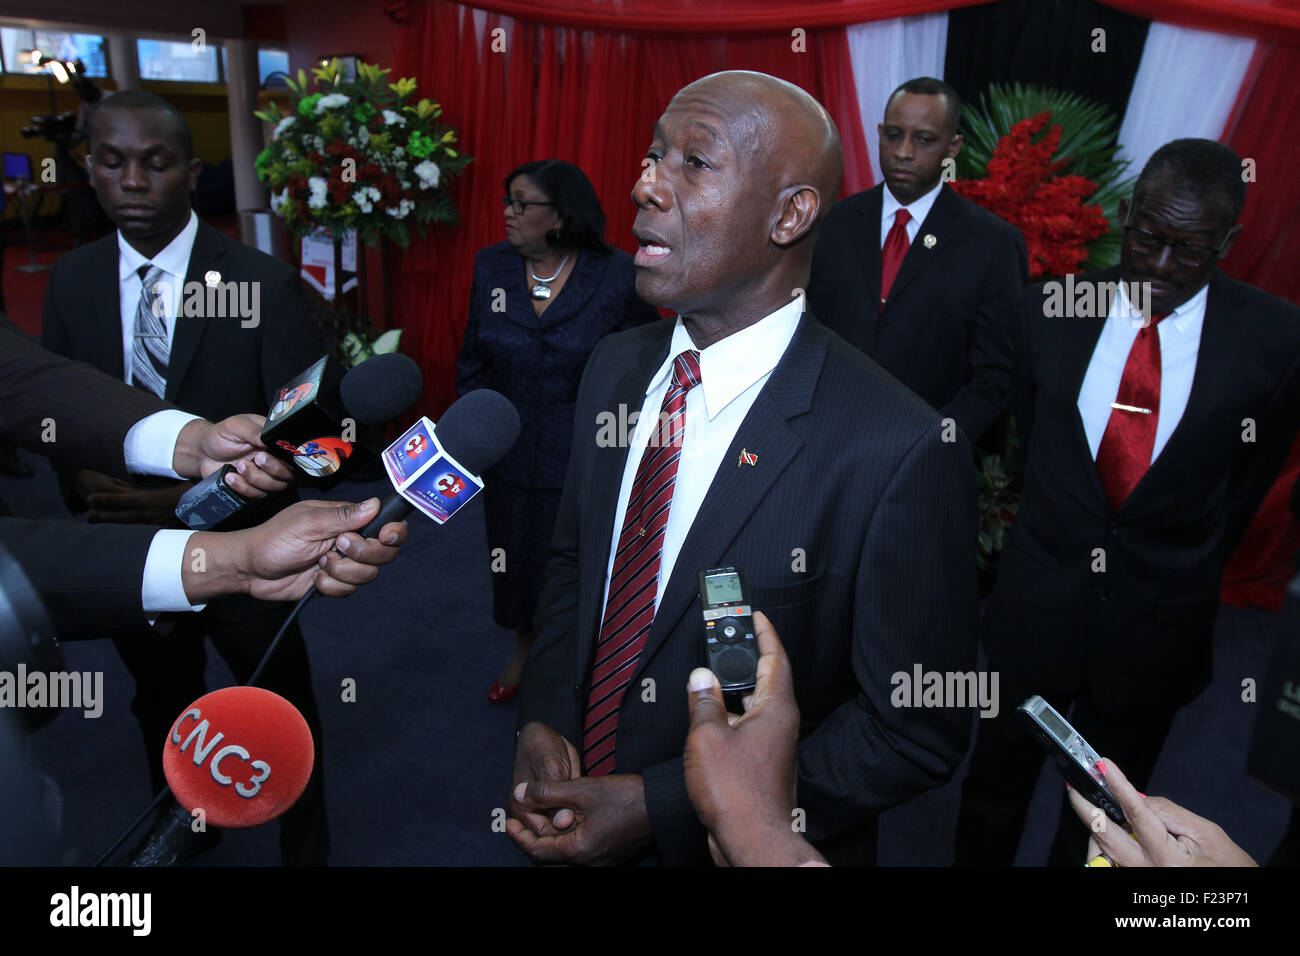 Port of Spain, Trinidad & Tobago. 9th September, 2015. Keith Christopher Rowley, Prime Minister of Trinidad & Tobago, speaks to journalists at his swearing-in ceremony at Queen's Hall in Port of Spain, Trinidad on September 9, 2015.  (Photo by Sean Drakes/Alamy Live News) Credit:  SEAN DRAKES/Alamy Live News Stock Photo